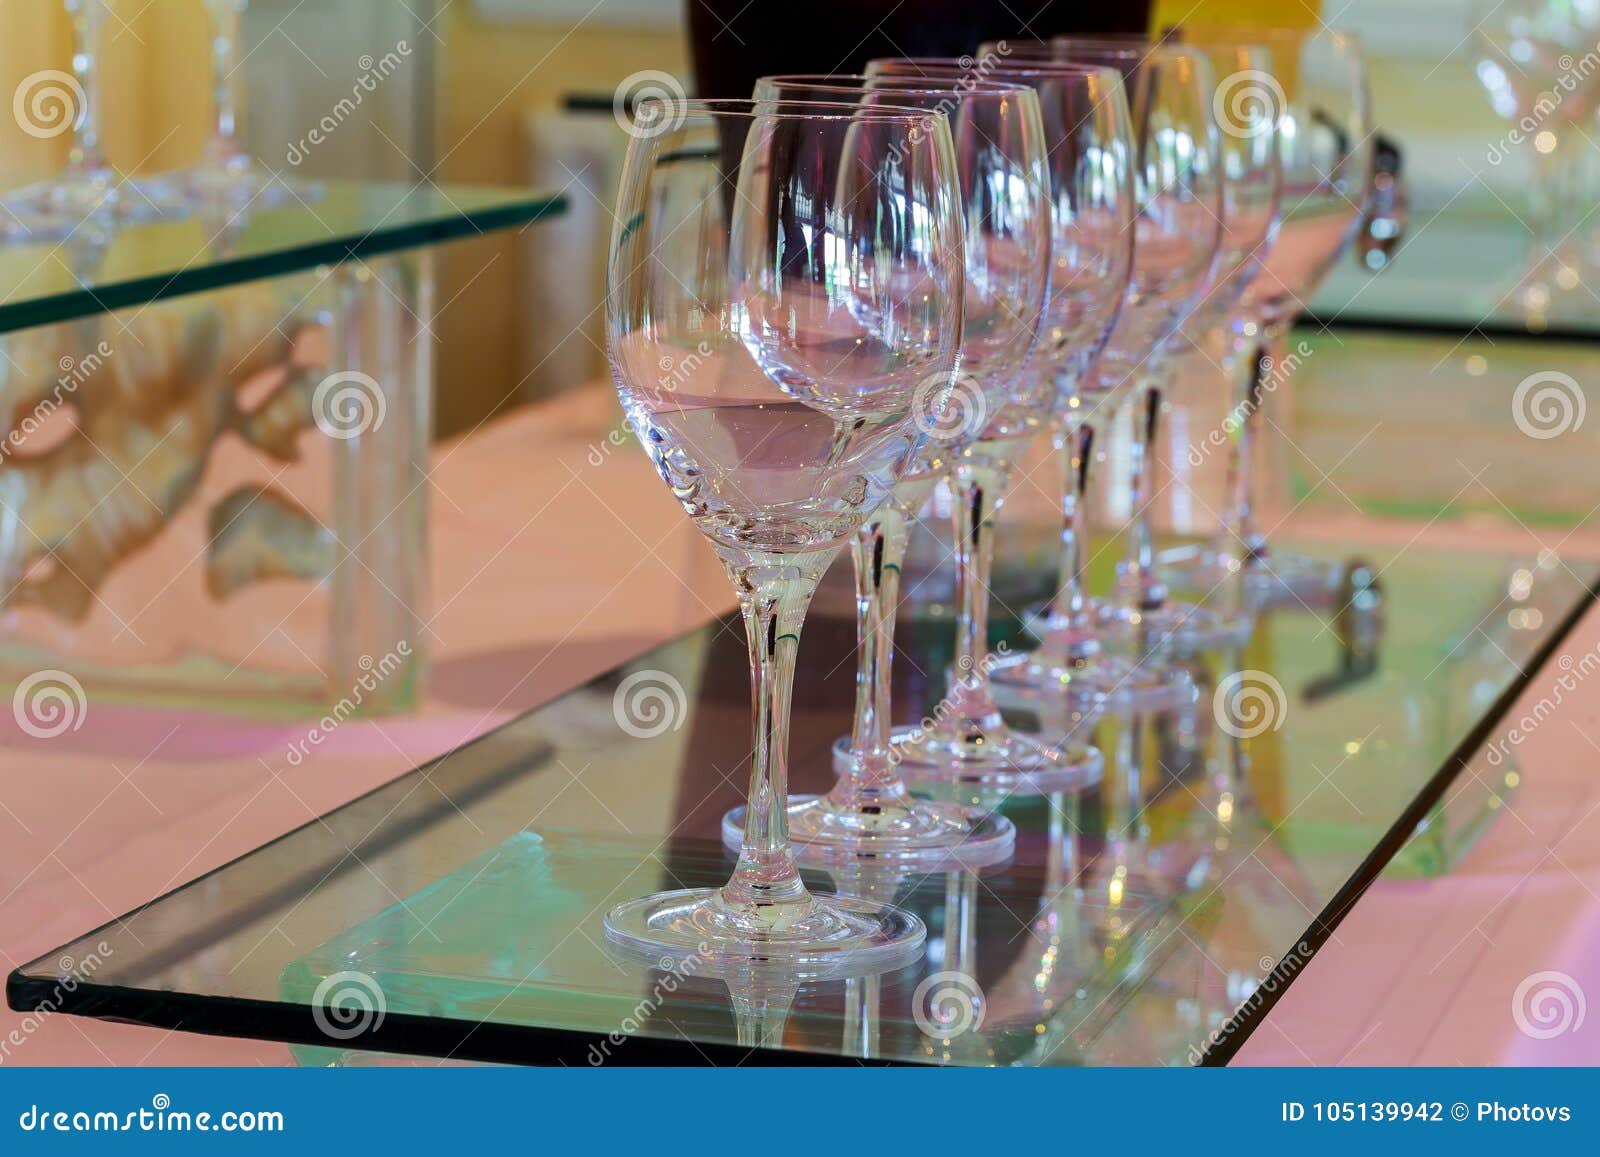 Glasses Of Wine At The Bar Many Glasses Of Different Wine